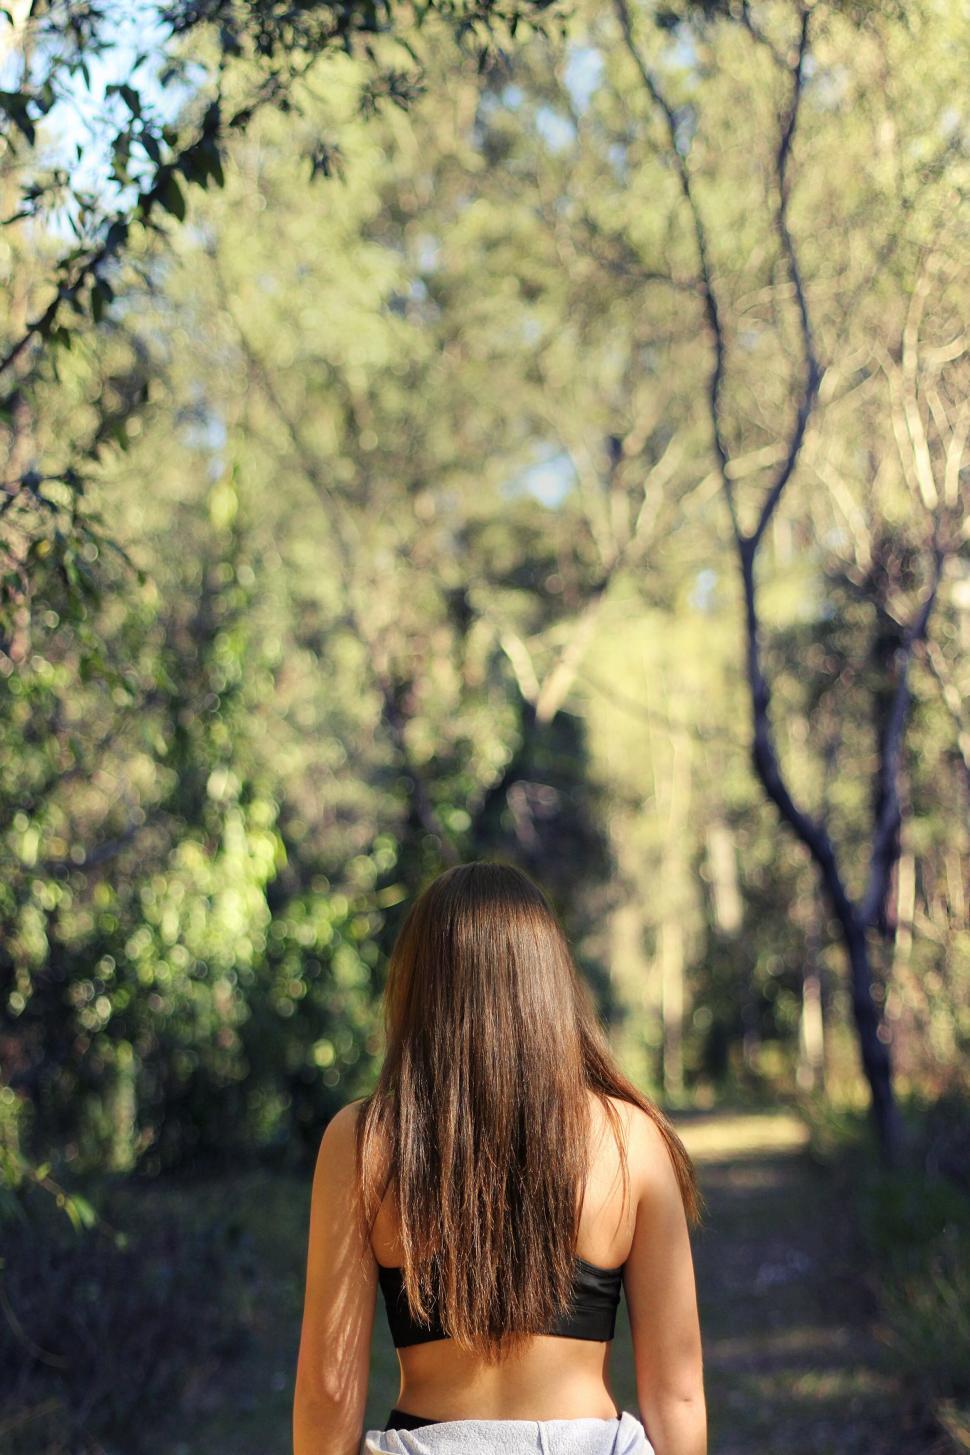 Free Image of Back view of a woman in a forest pathway 